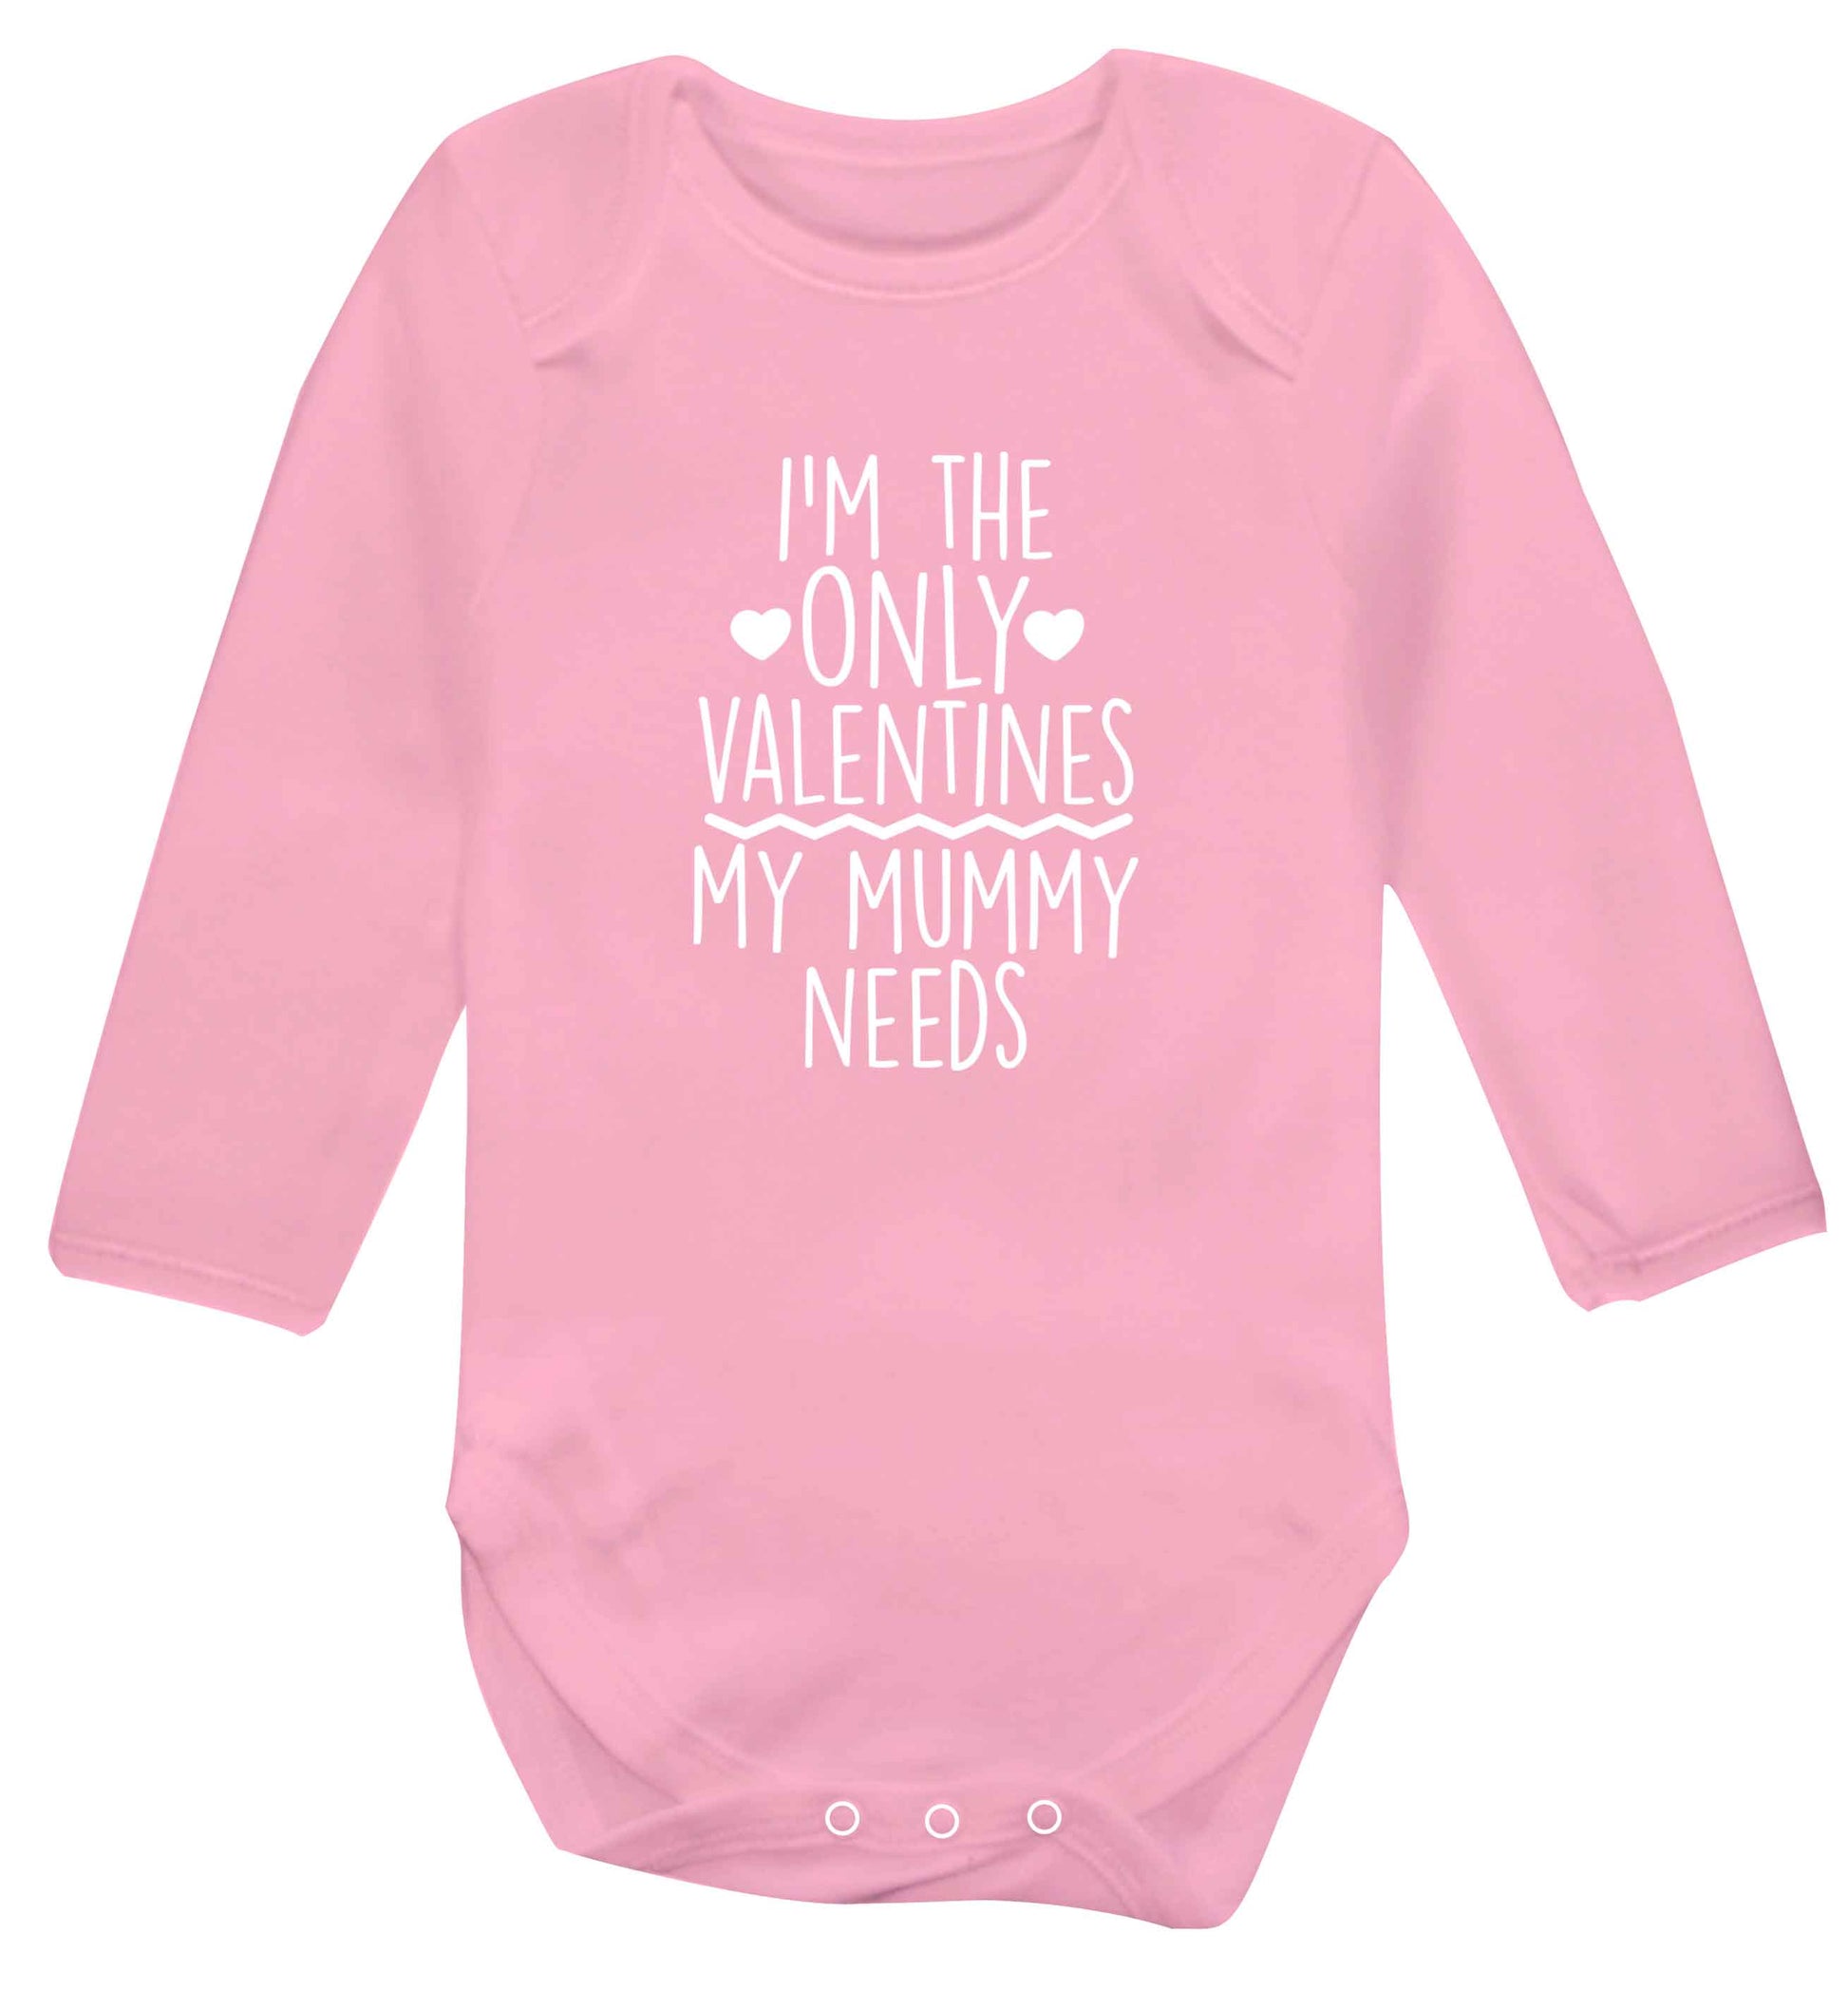 I'm the only valentines my mummy needs baby vest long sleeved pale pink 6-12 months